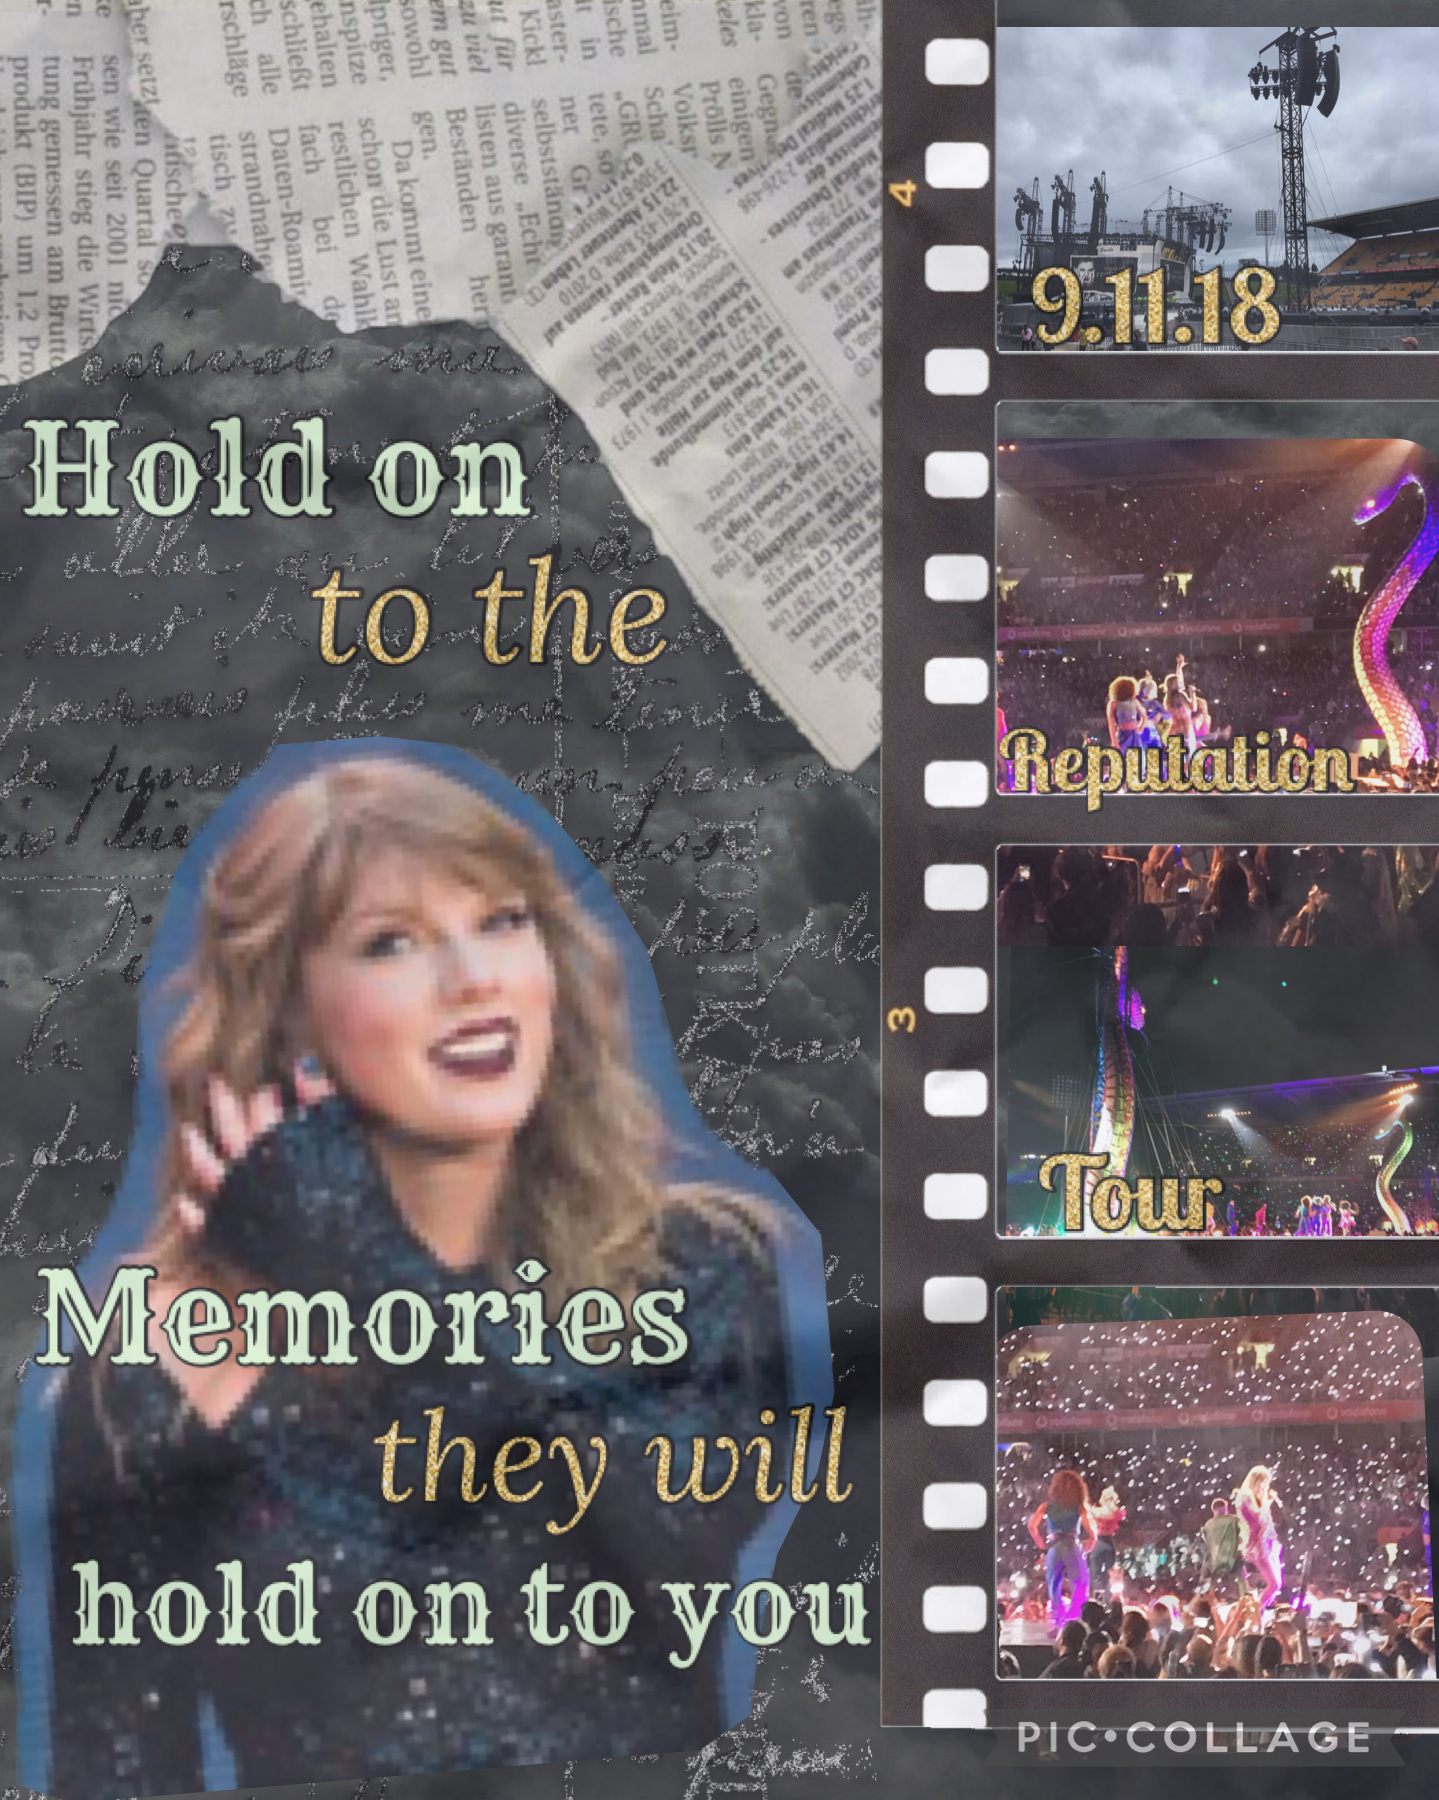 2.5.22 Reputation tour  Taylor Swift aesthetic collage.